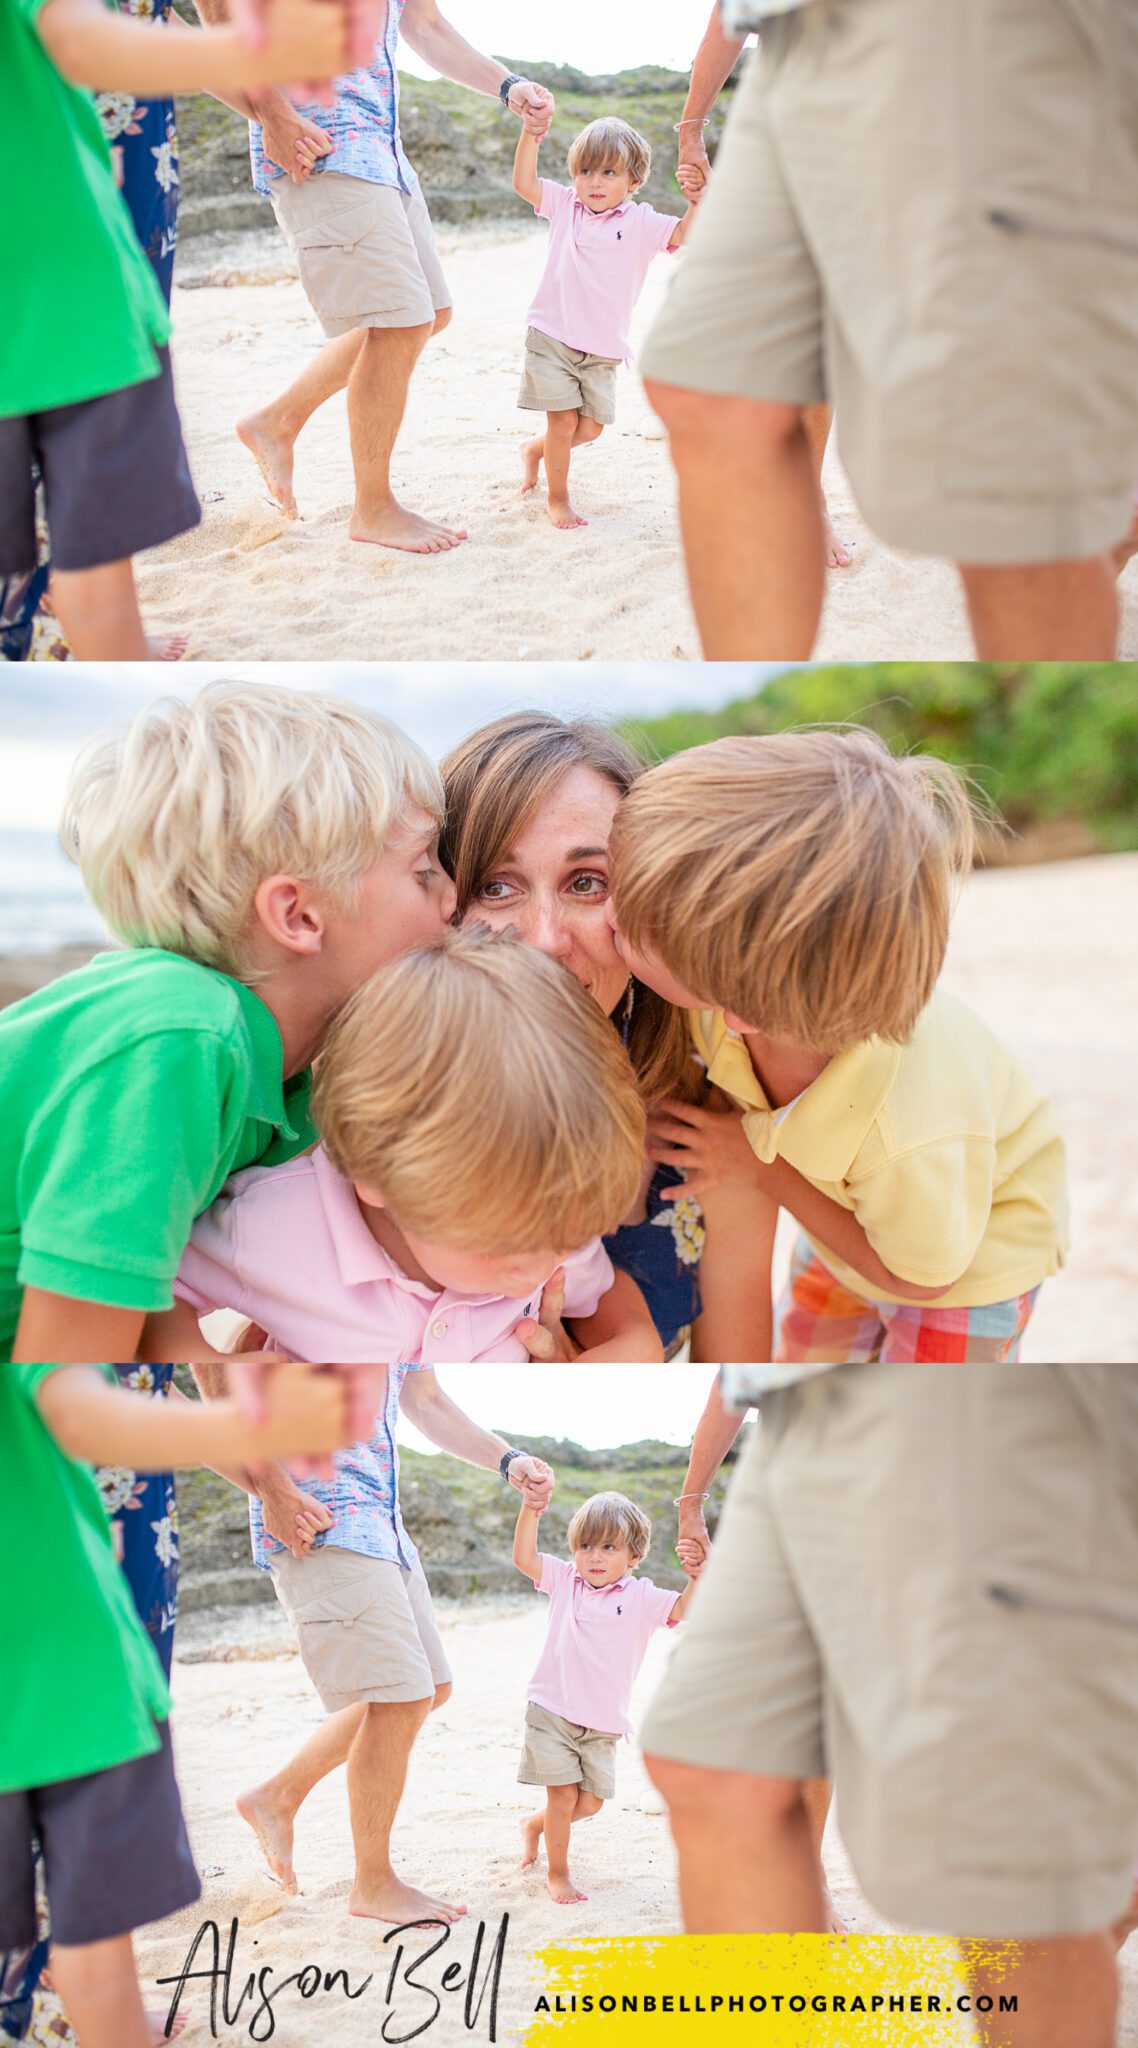 Family Photographers in Honolulu Hawaii. An extended family session by Alison Bell, Photographer